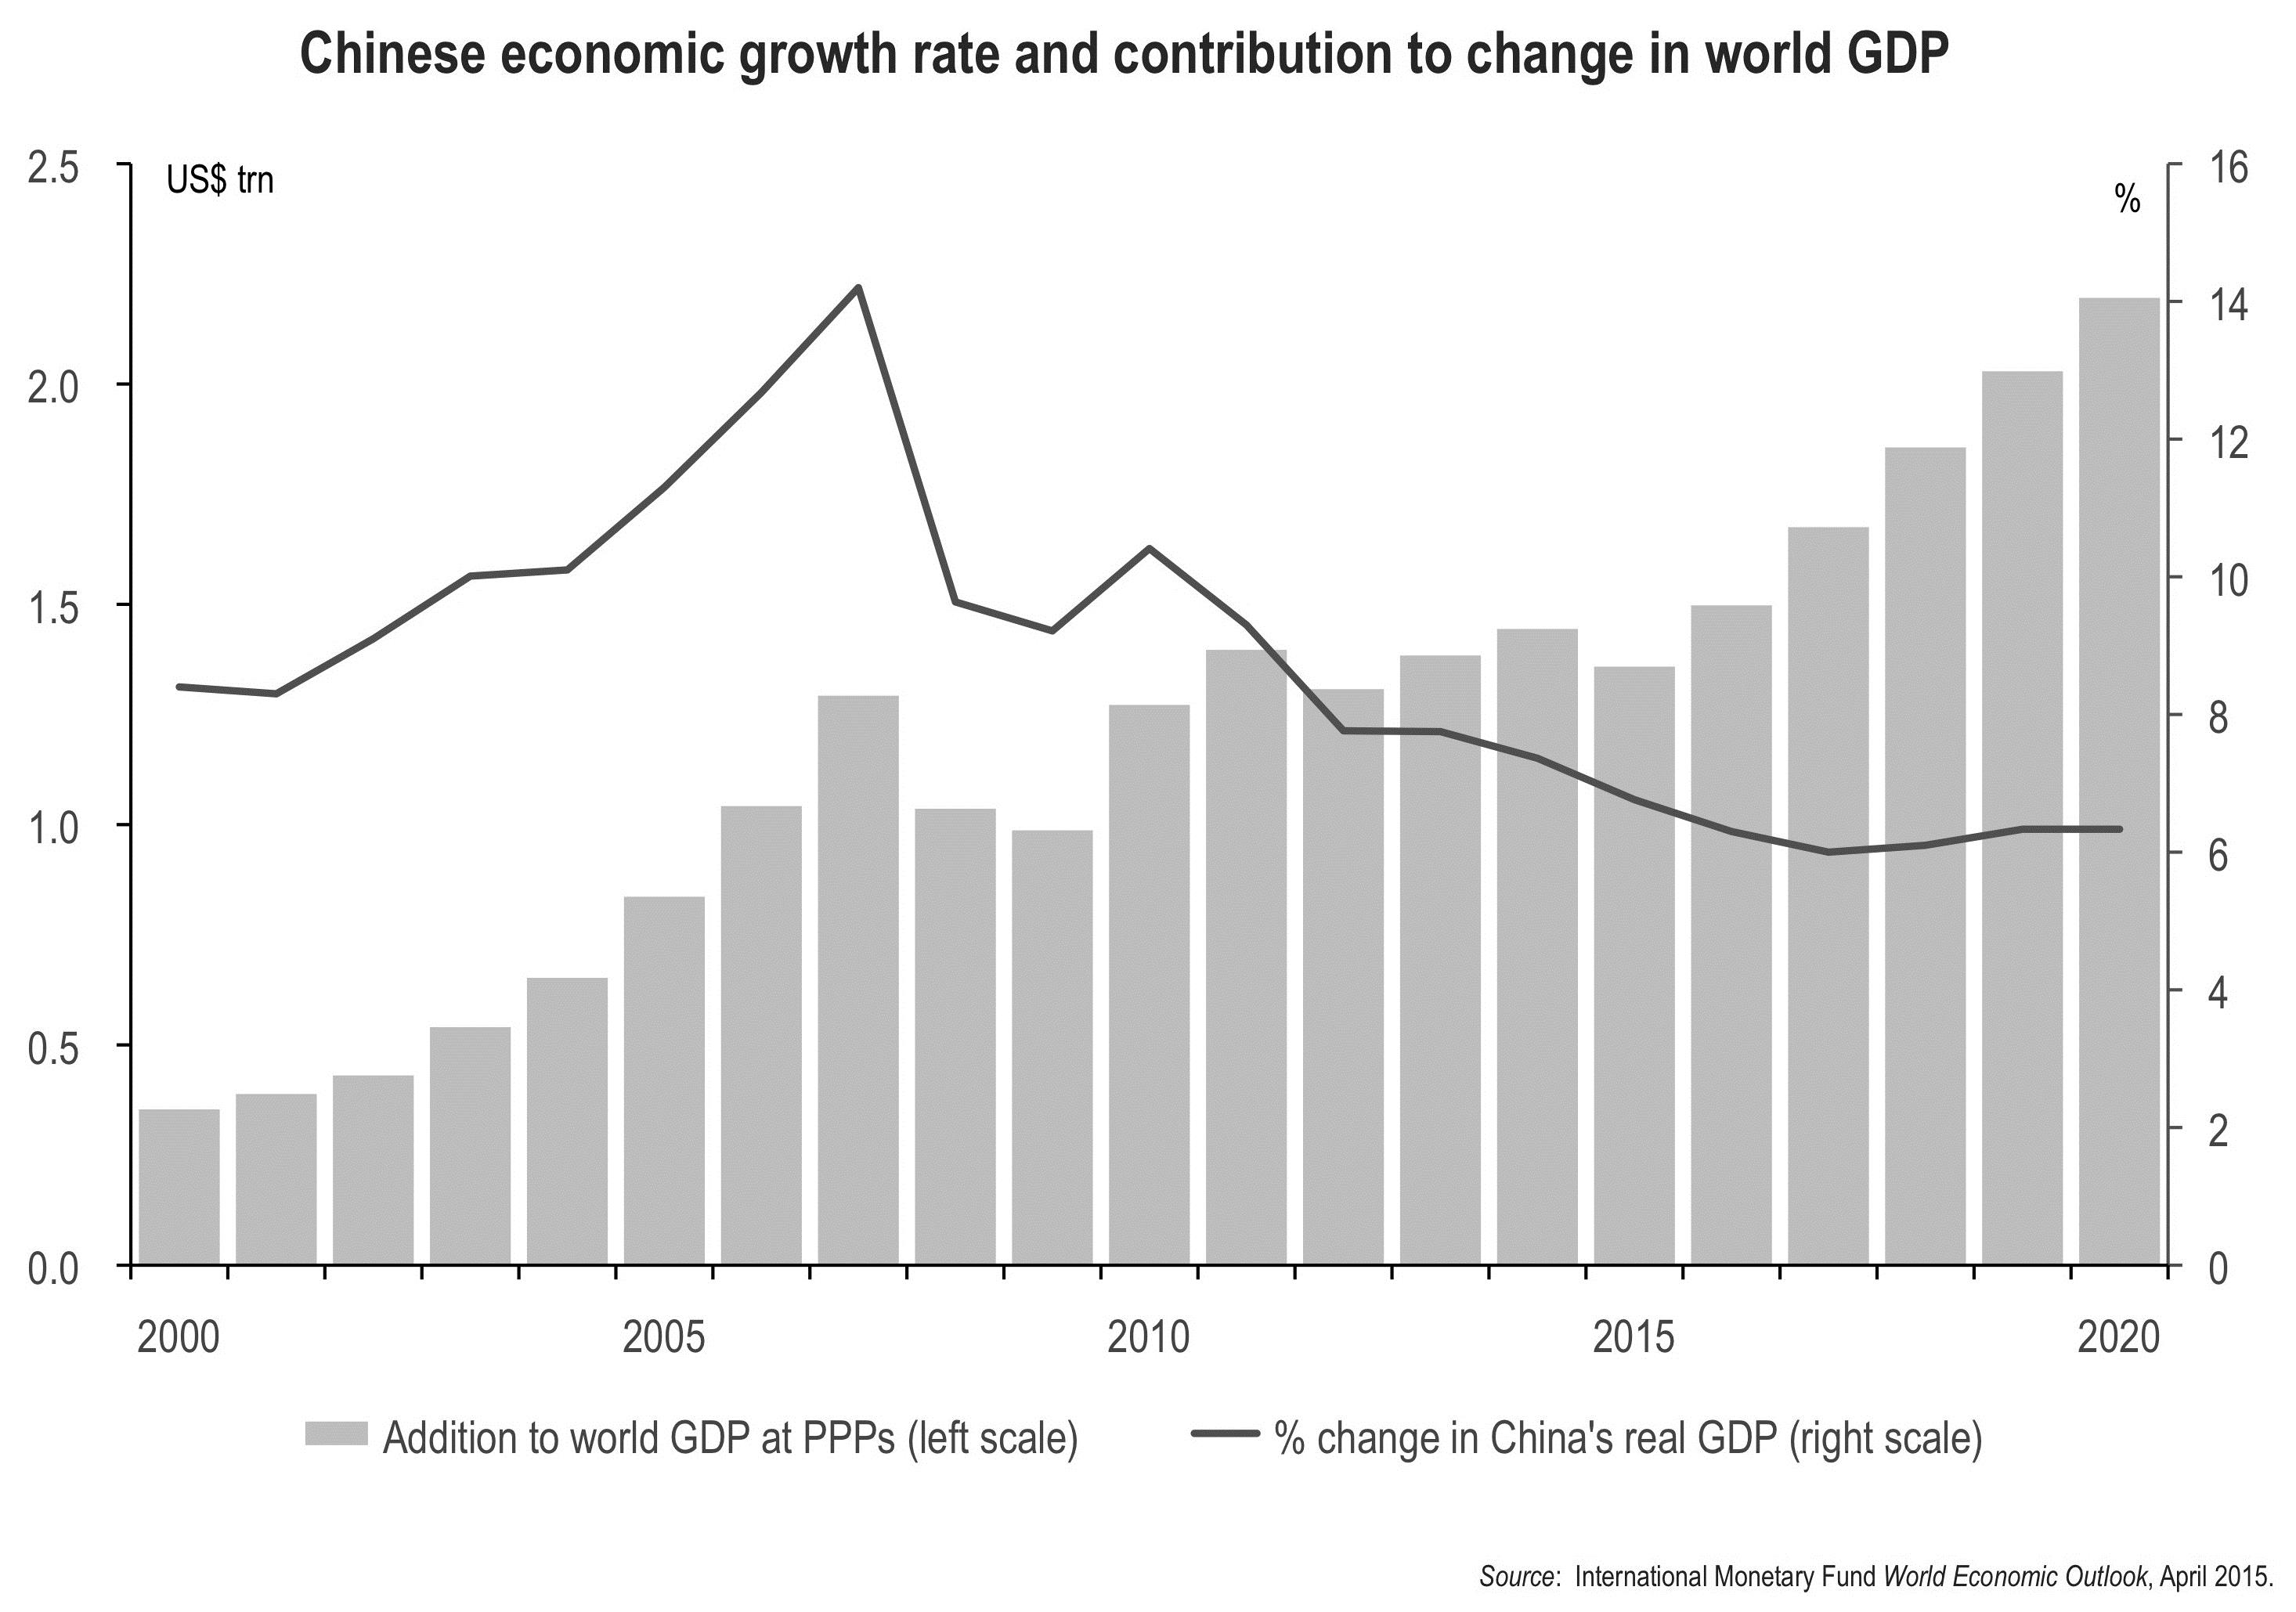 Figure 9: Chinese economic growth rate and contribution to change in world GDP.